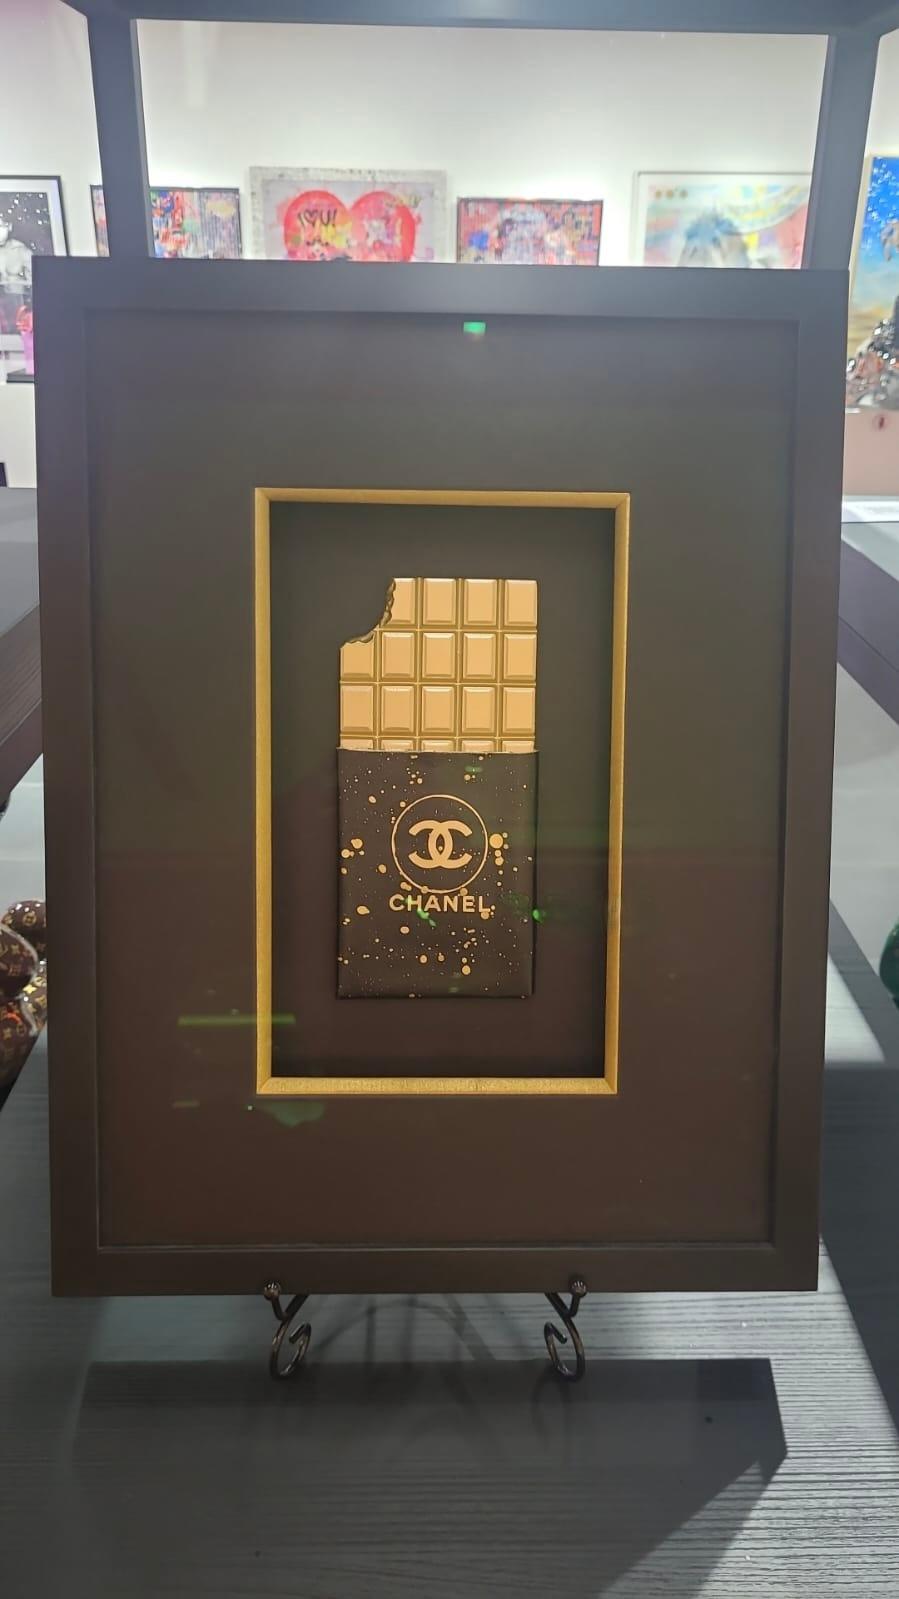 Chocolate Box Crunched, CH Tribute - Pop Art Mixed Media Art by mahelle